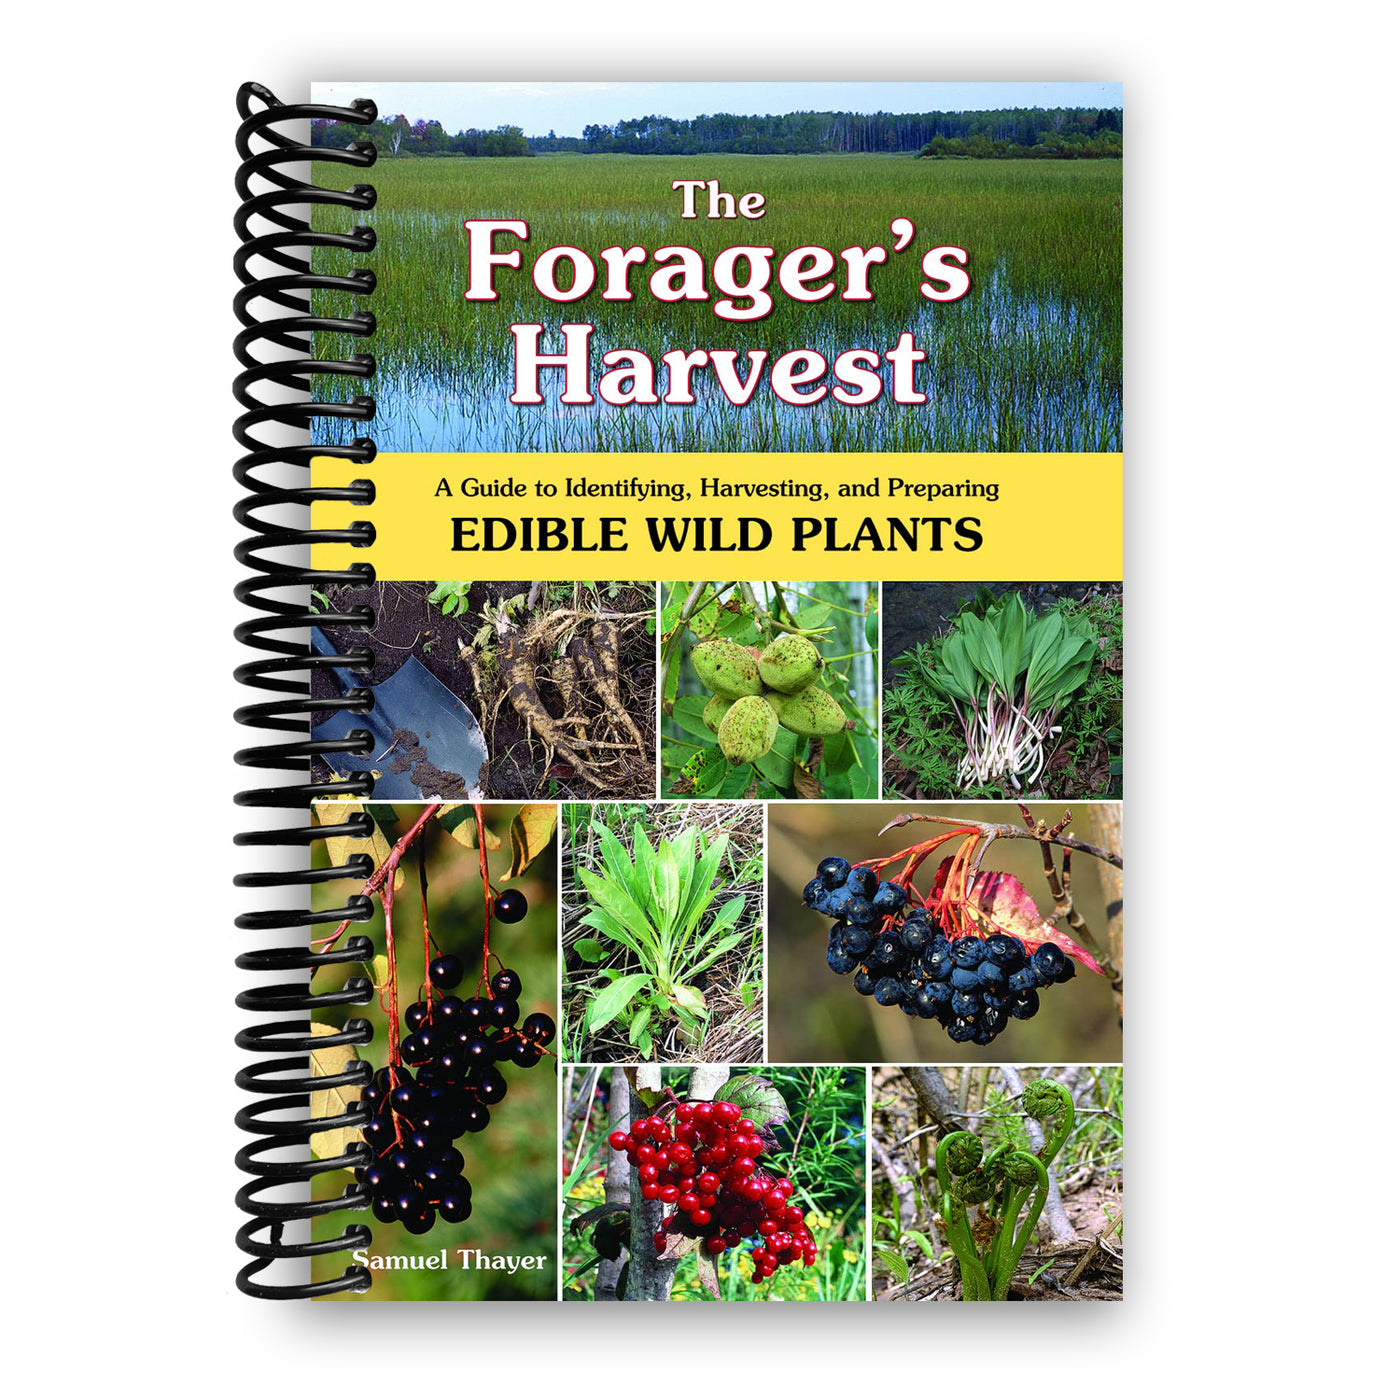 The Forager's Harvest: A Guide to Identifying, Harvesting, and Preparing Edible Wild Plants (Spiral Bound)